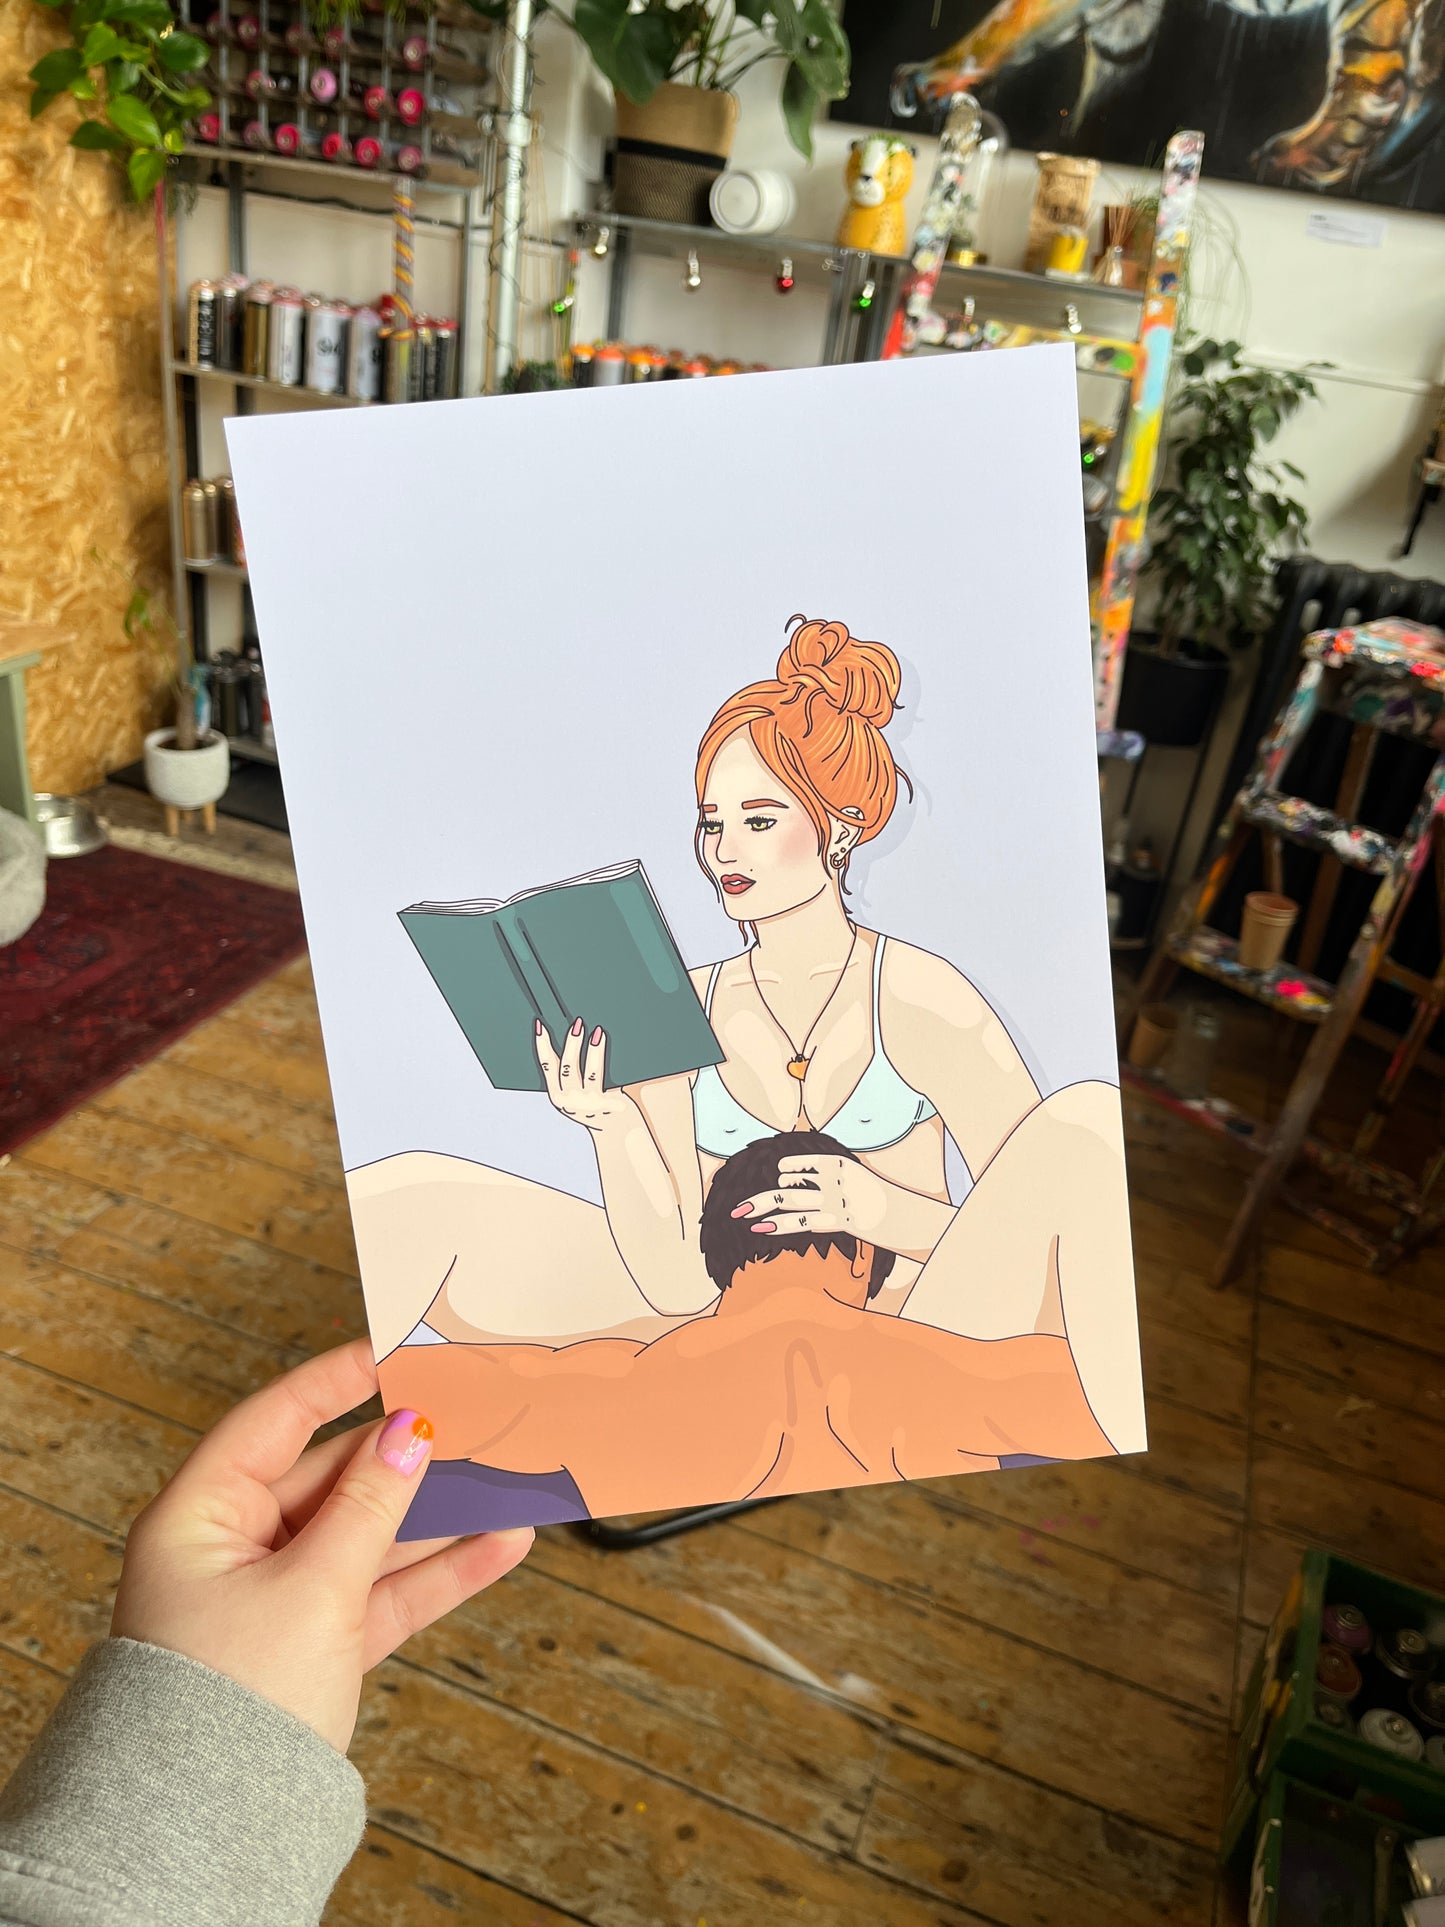 'I'd Rather be Reading' Print